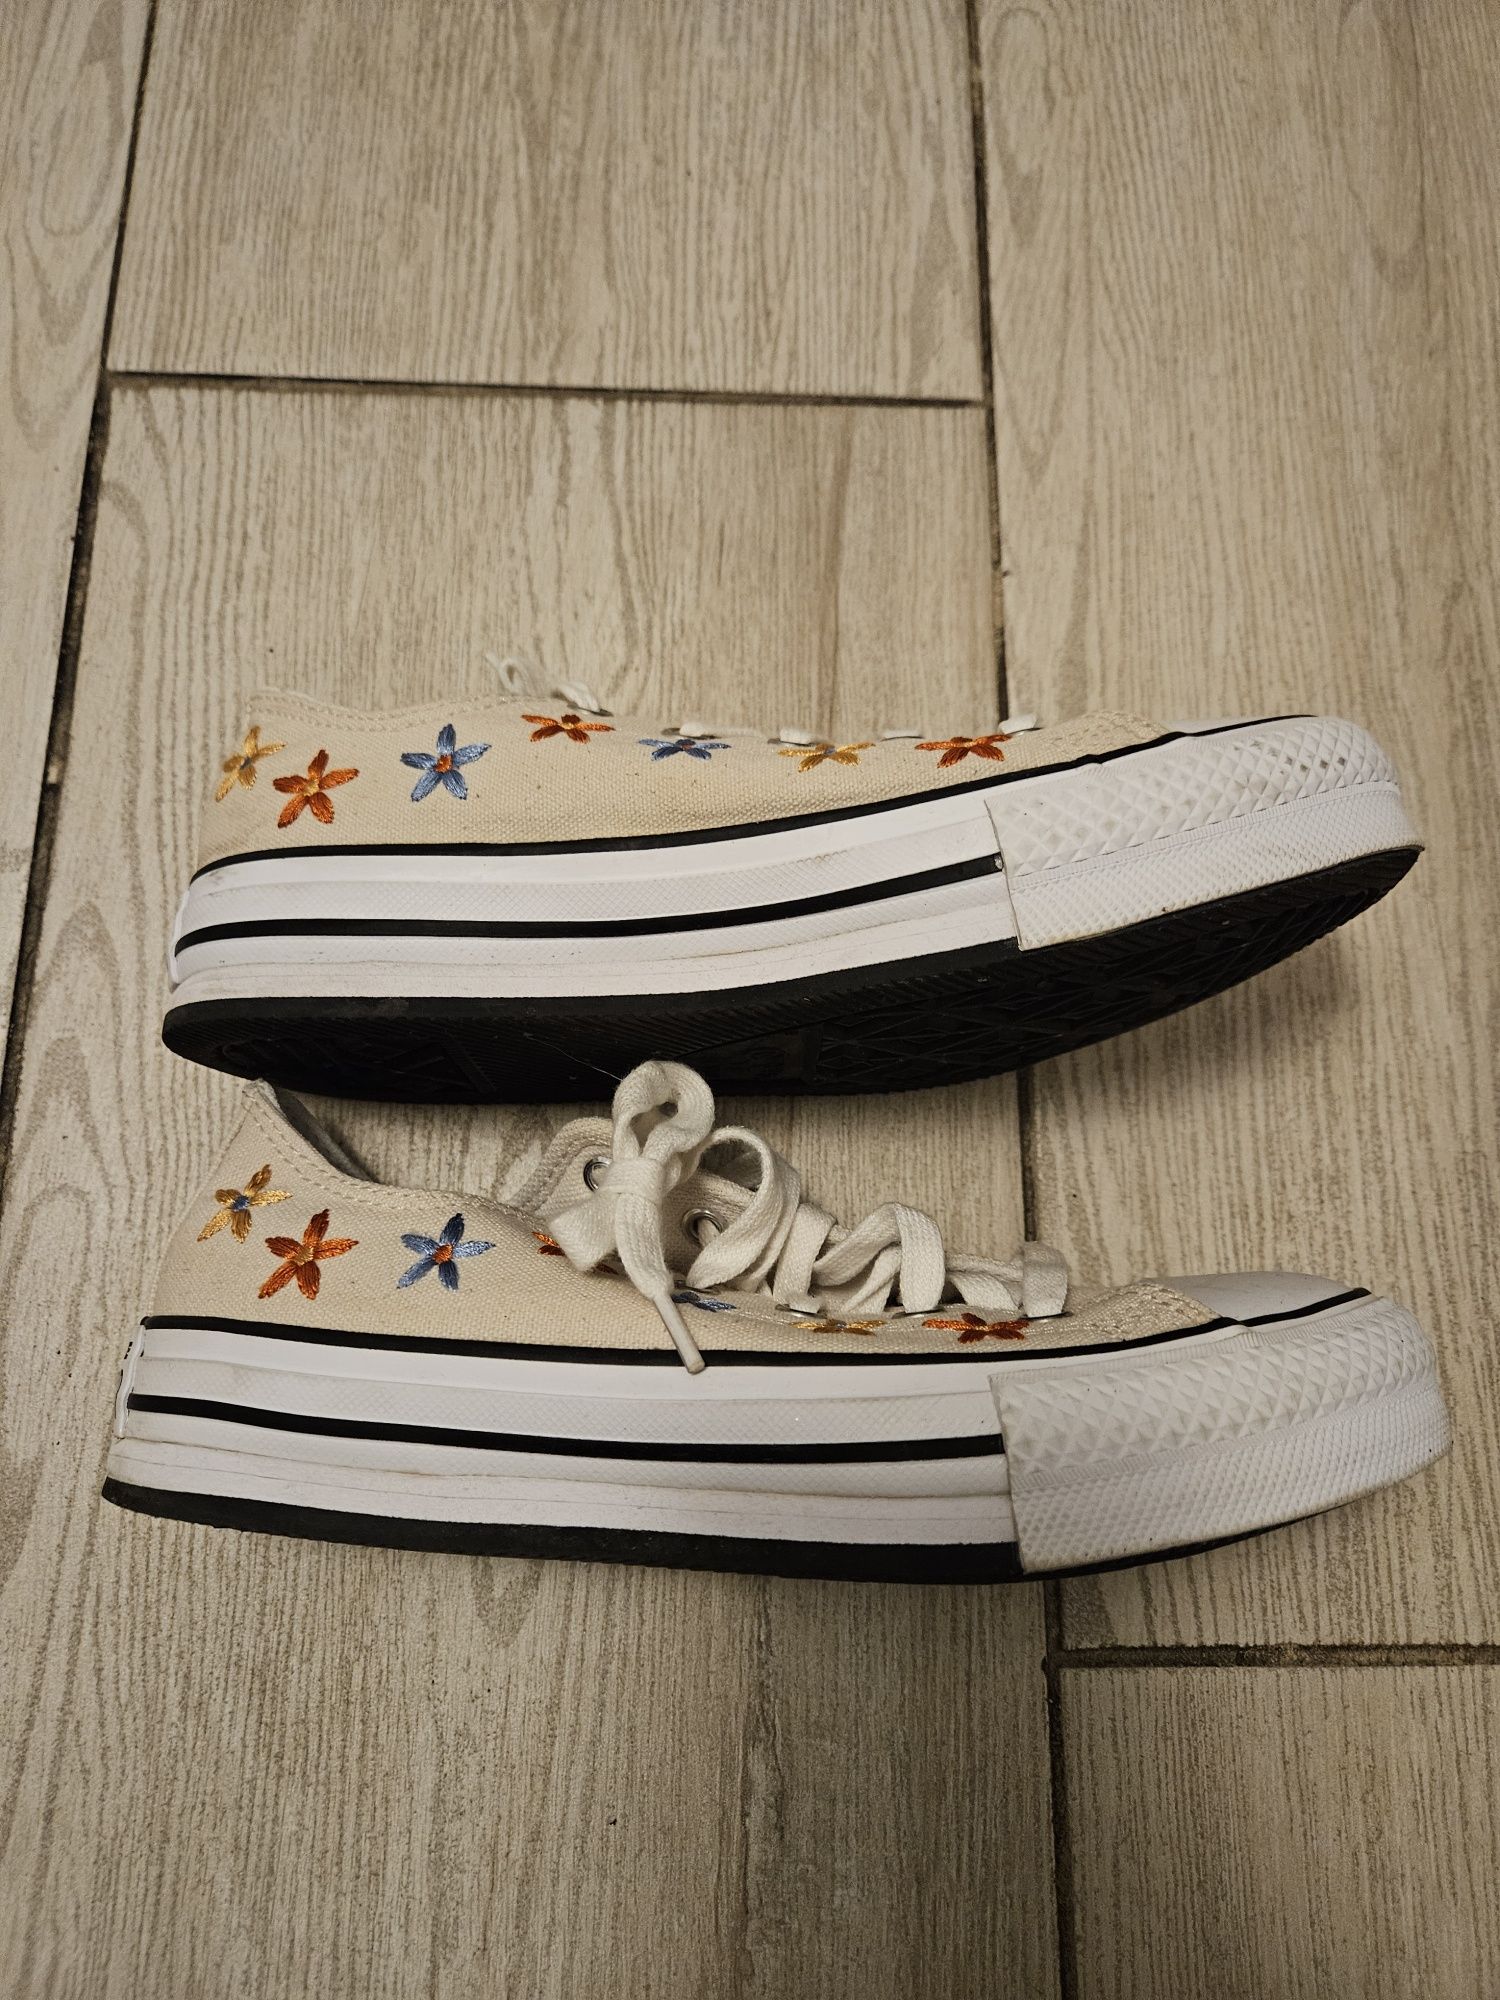 Converse all star model floral